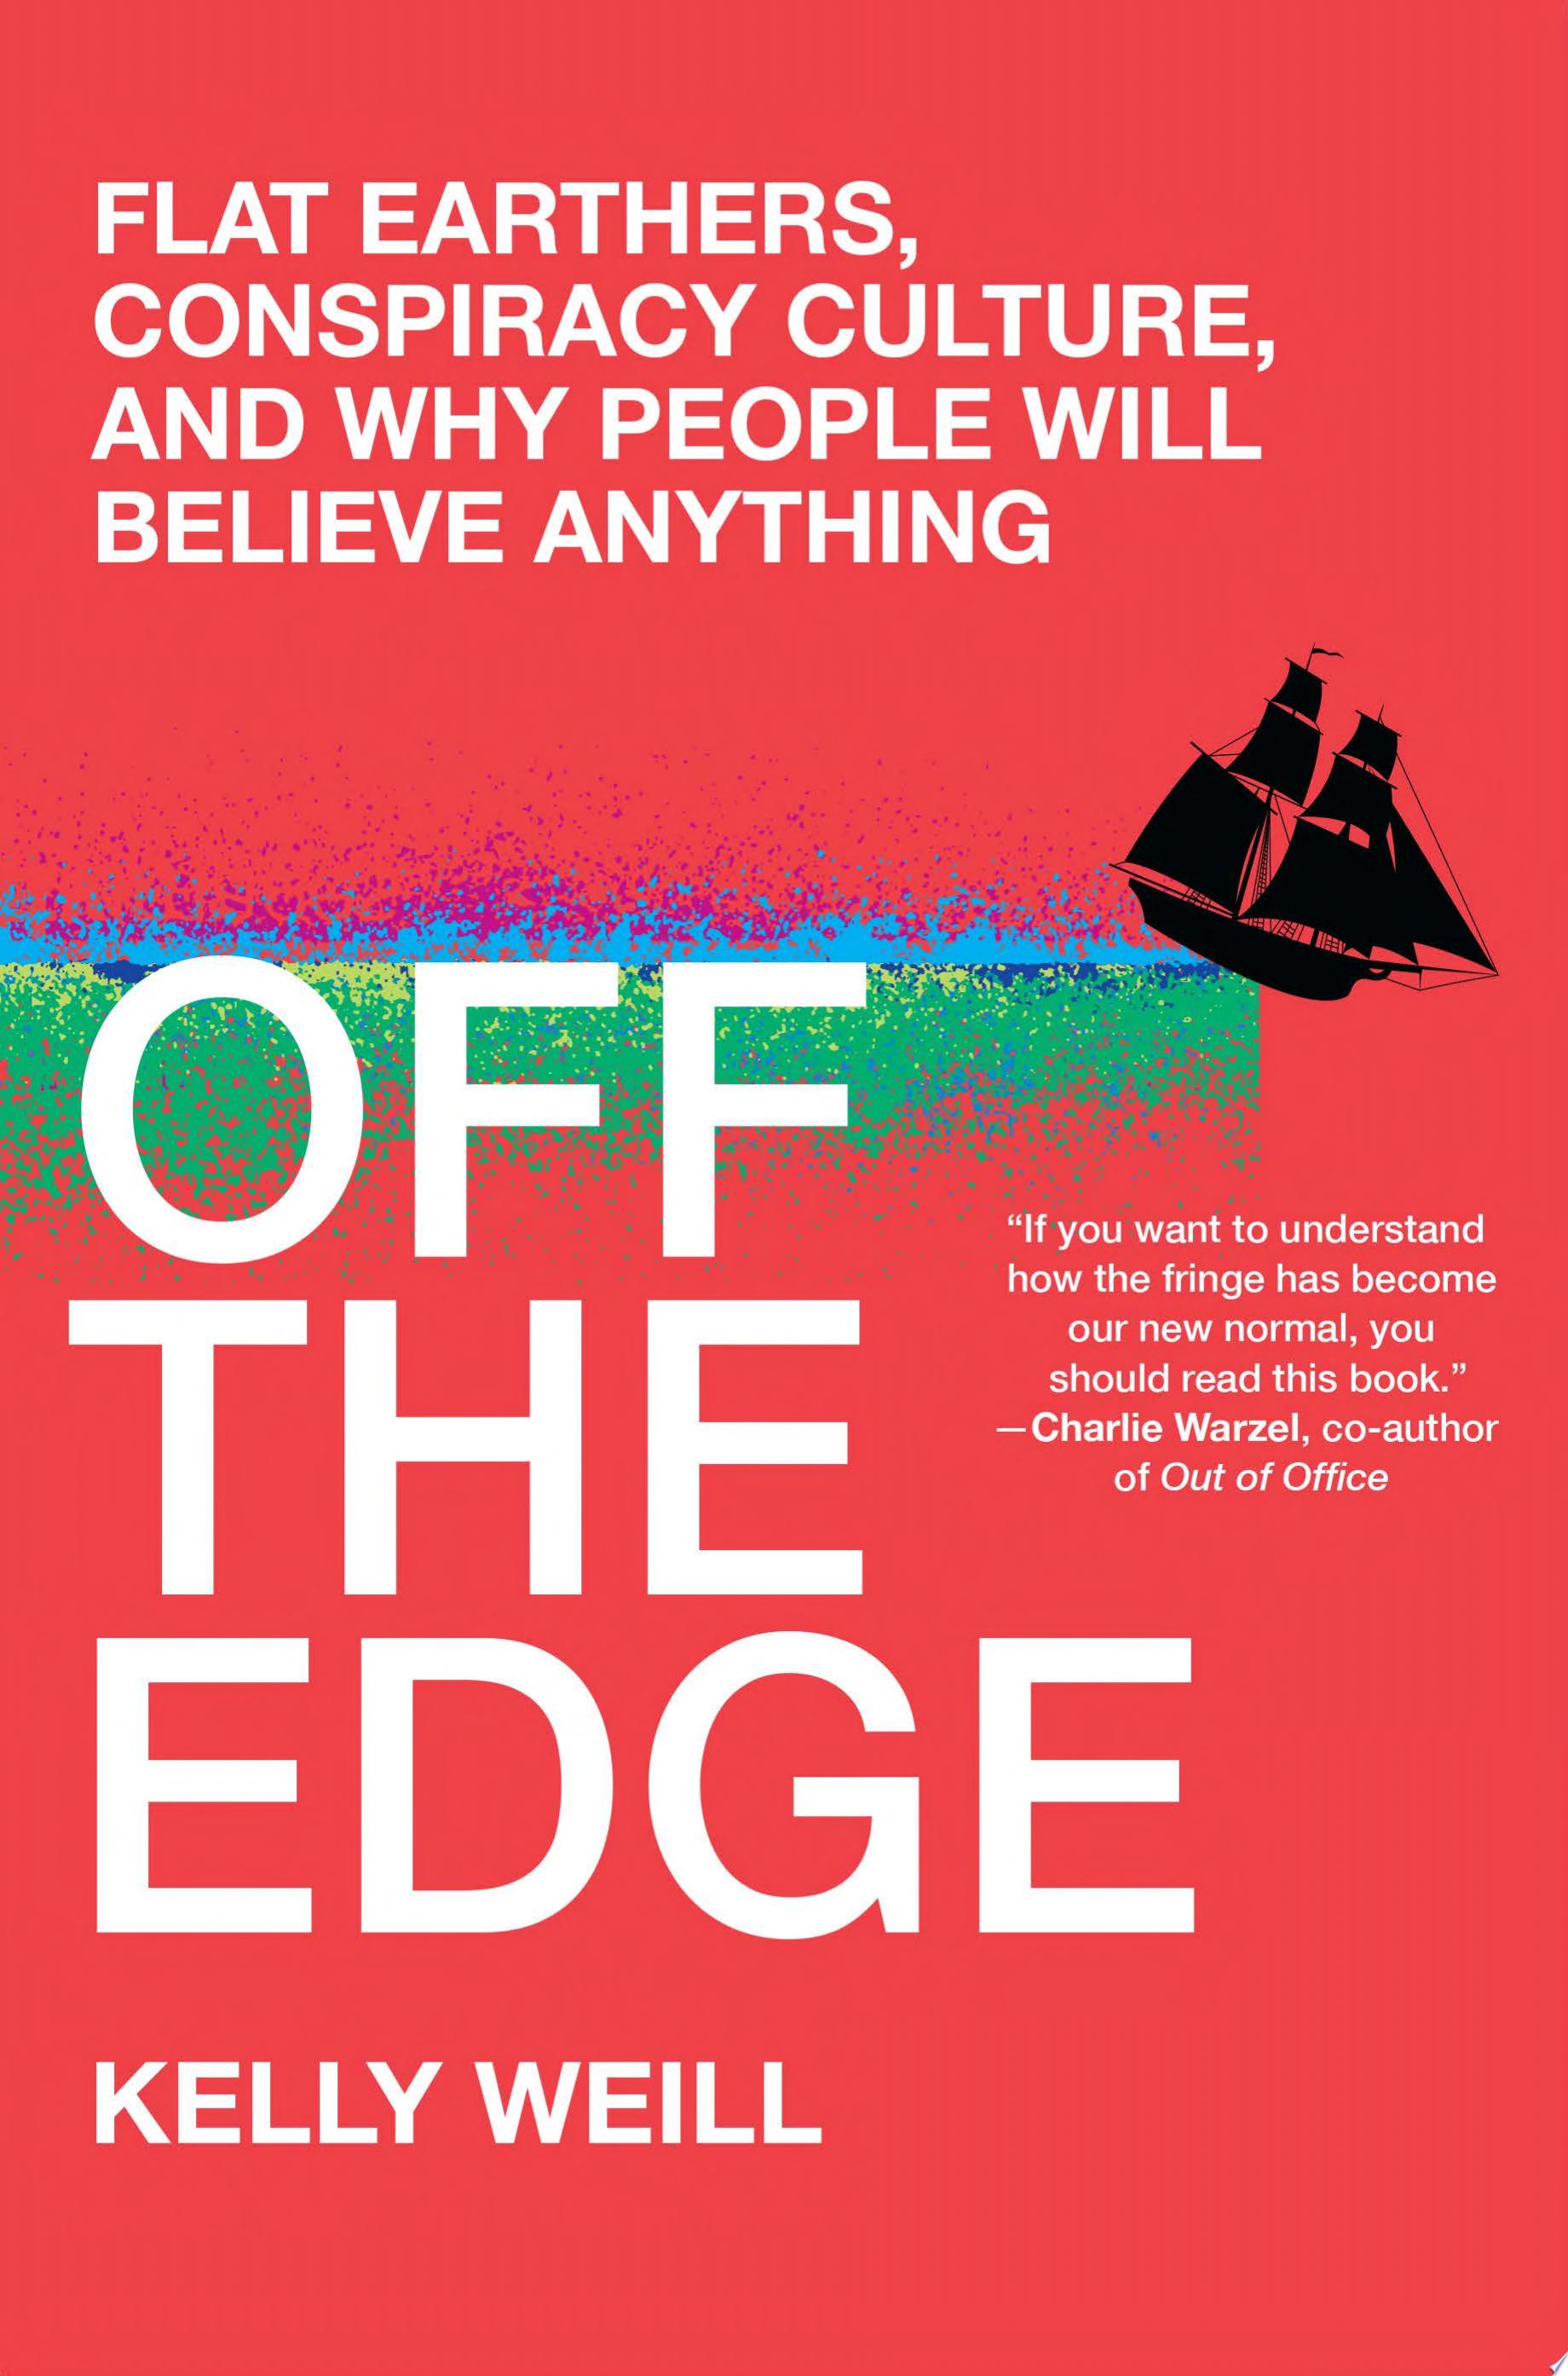 Image for "Off the Edge"